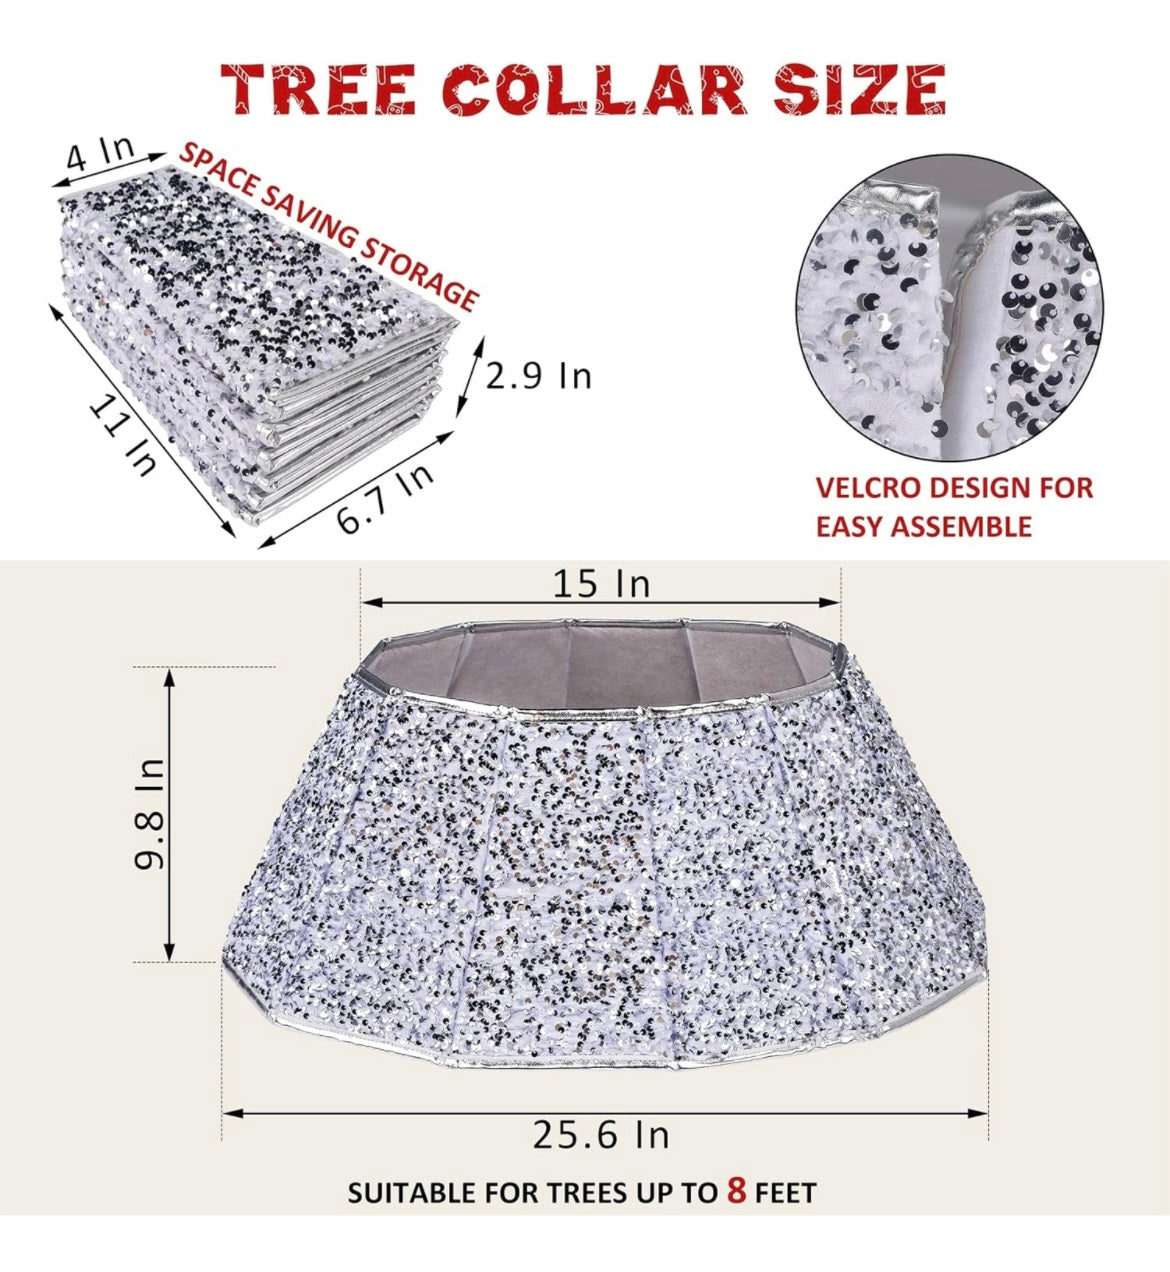 Blissun Christmas Tree Collar, Sequin Christmas Tree Skirt, Foldable Christmas Tree Ring, Xmas Tree Stand Base Cover for Christmas Tree Decoration (Silver, Round)